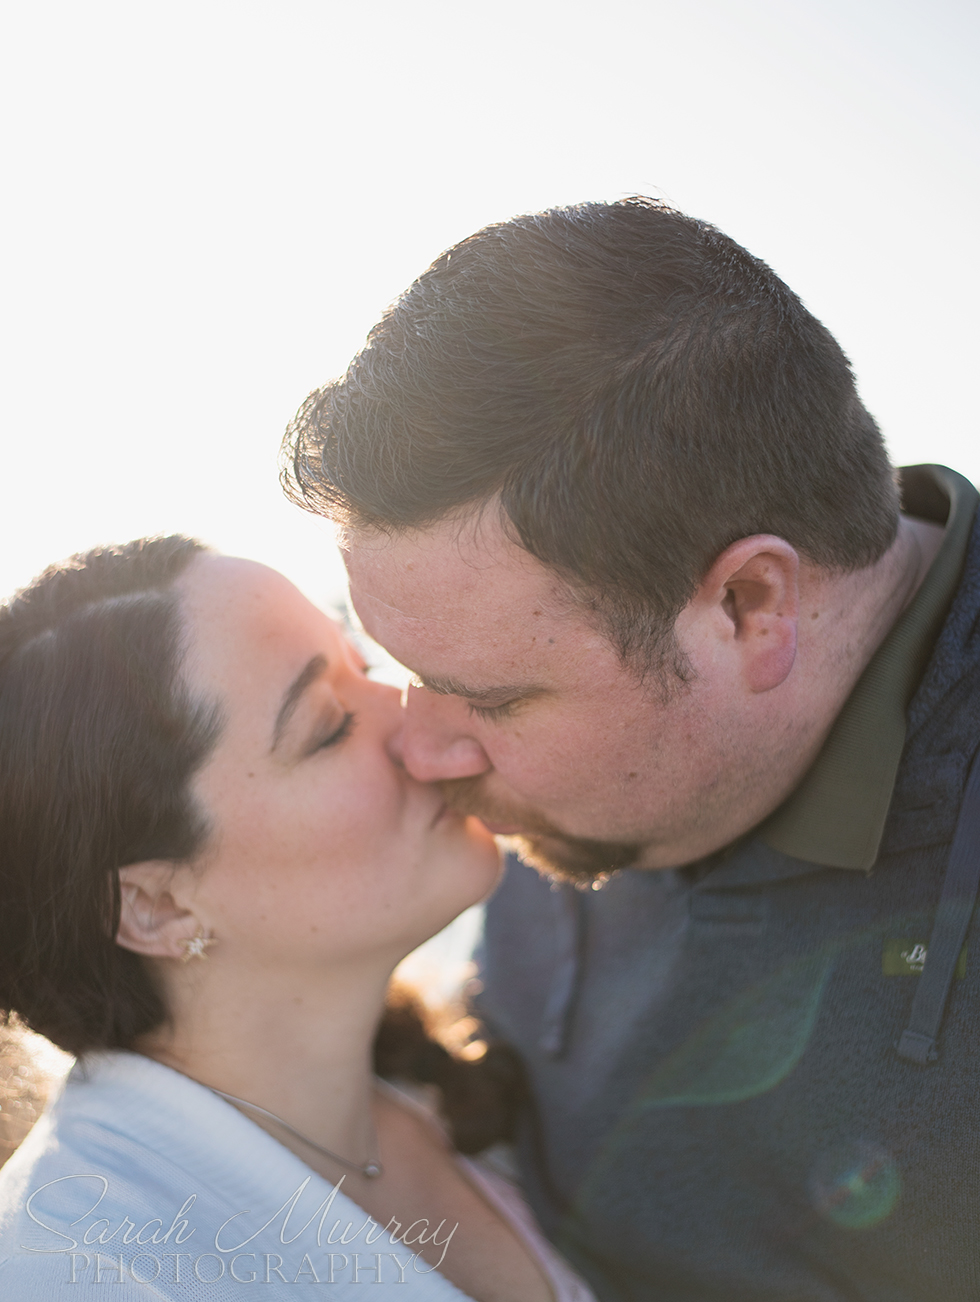 Cape Cod Engagement Session in Falmouth, Massachusetts - Sarah Murray Photography